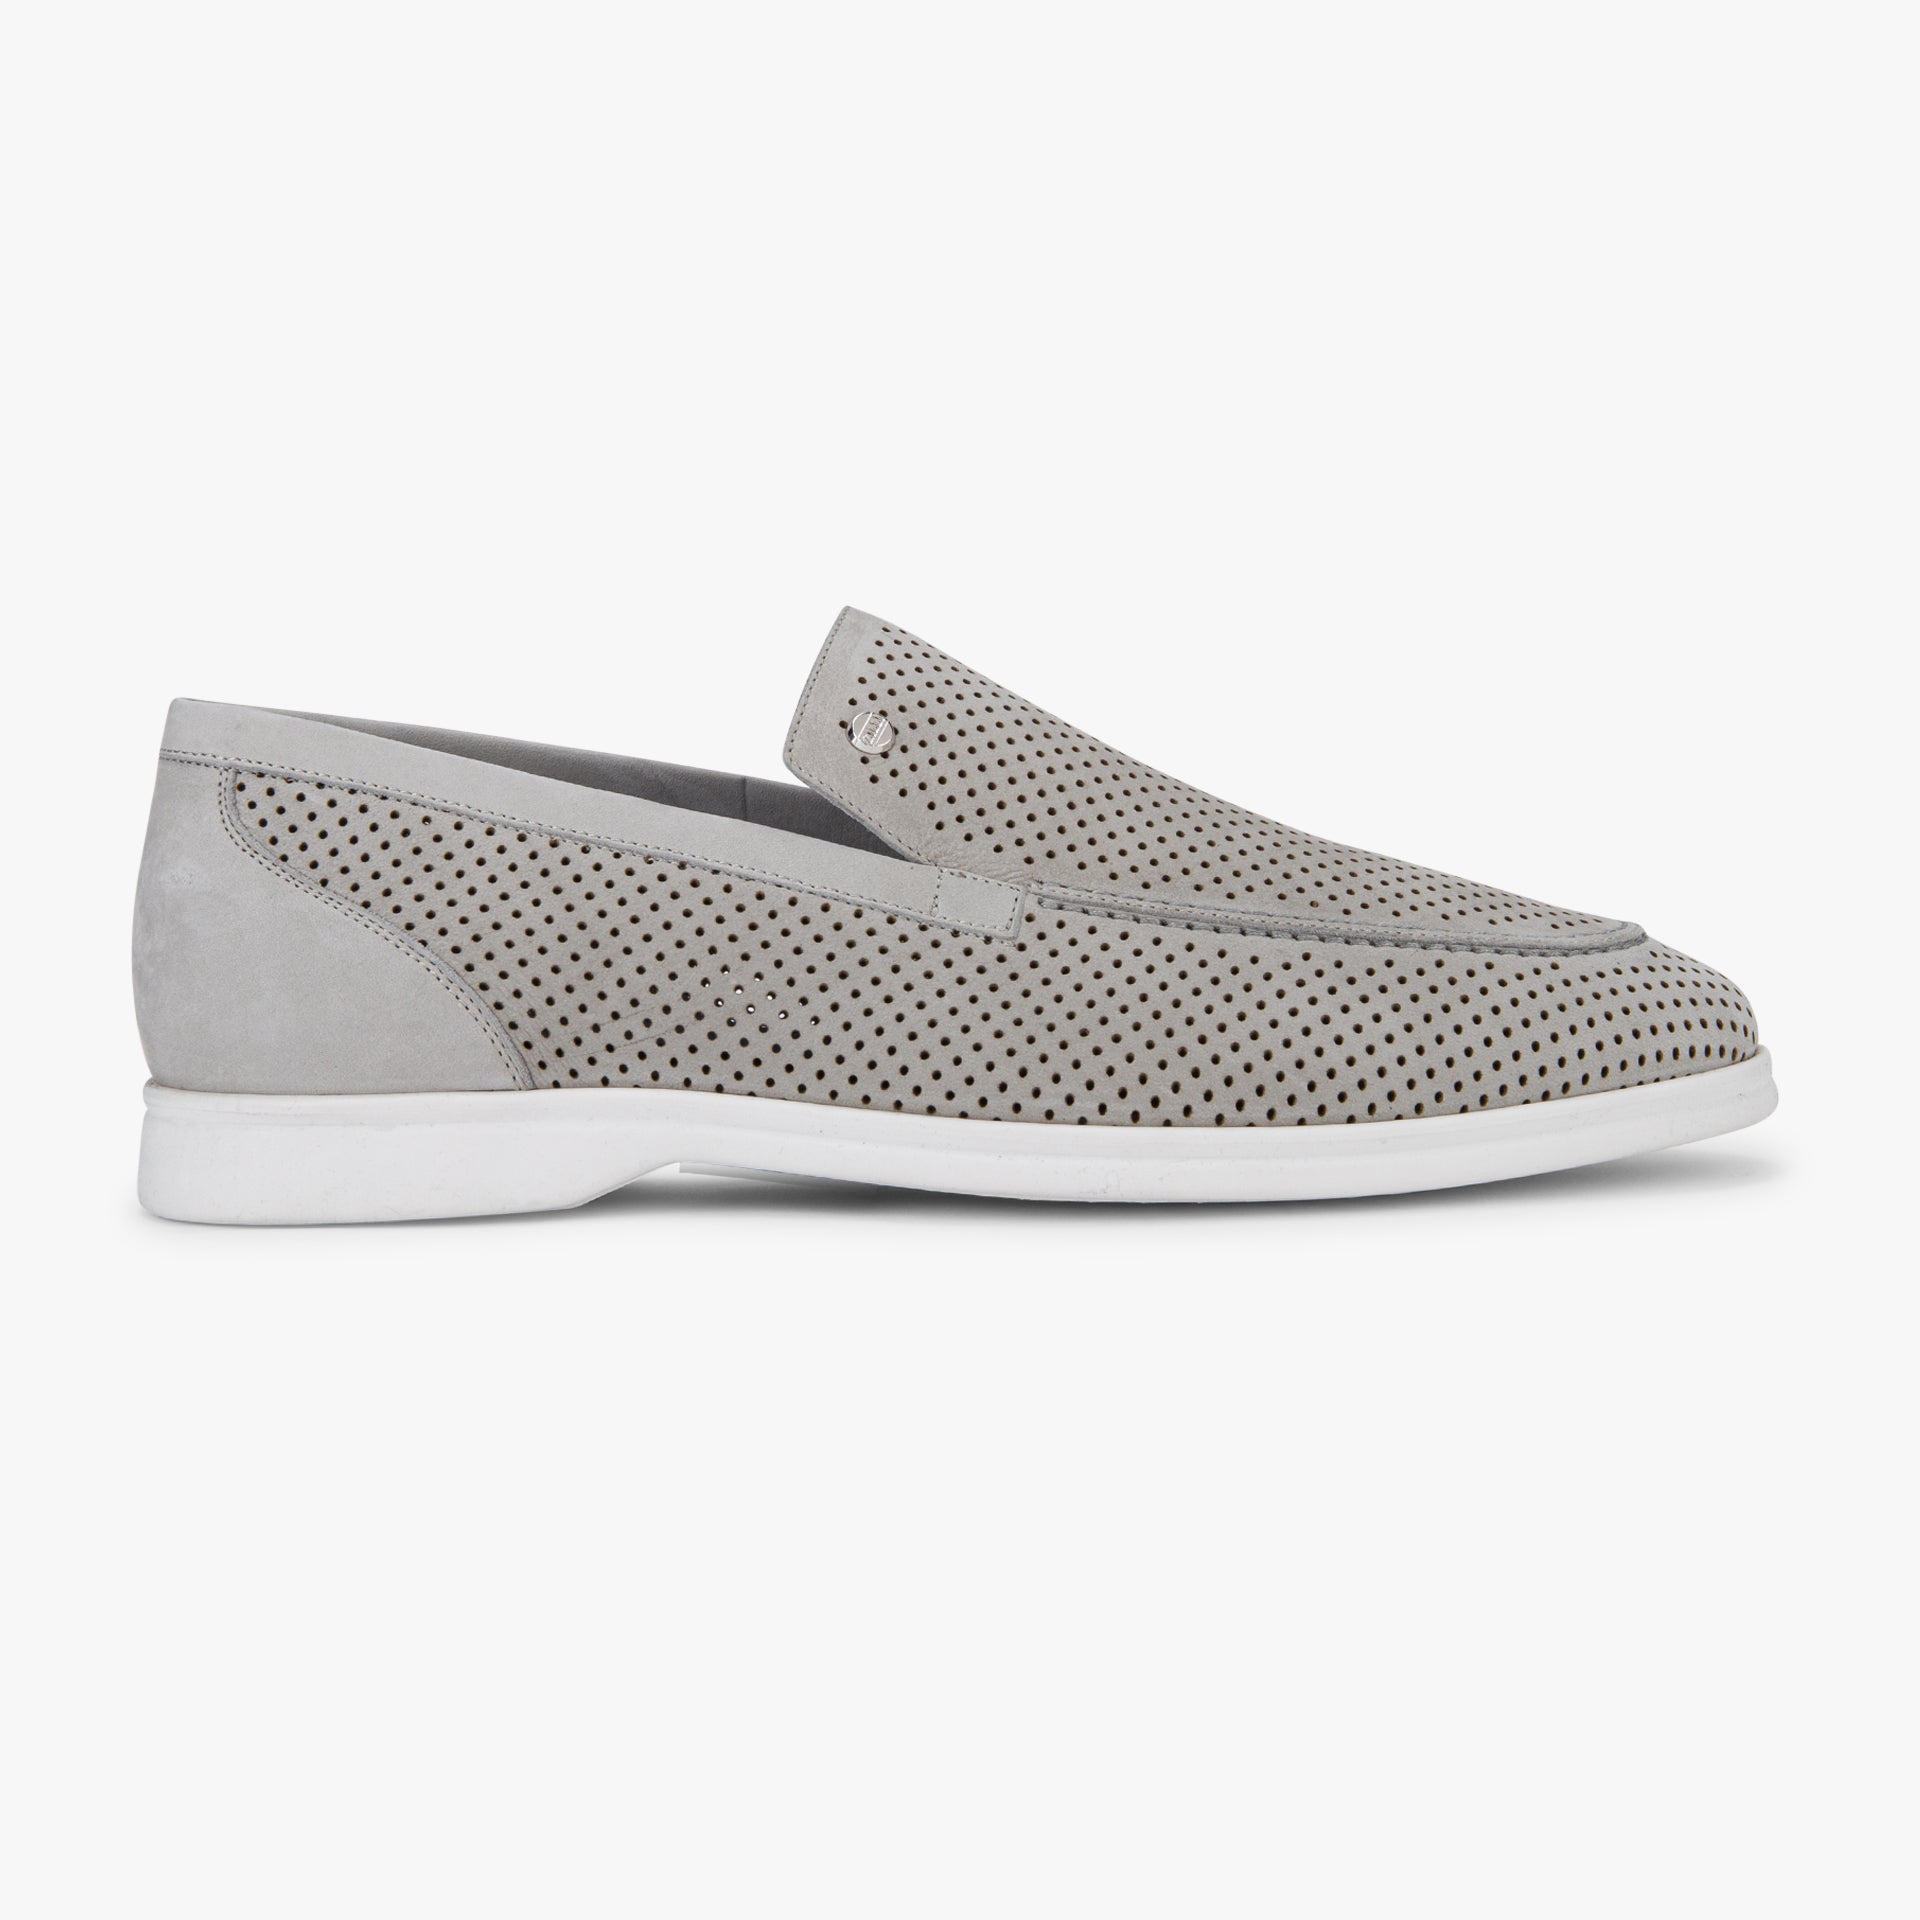 Perforated Suede Calfskin Moccassin